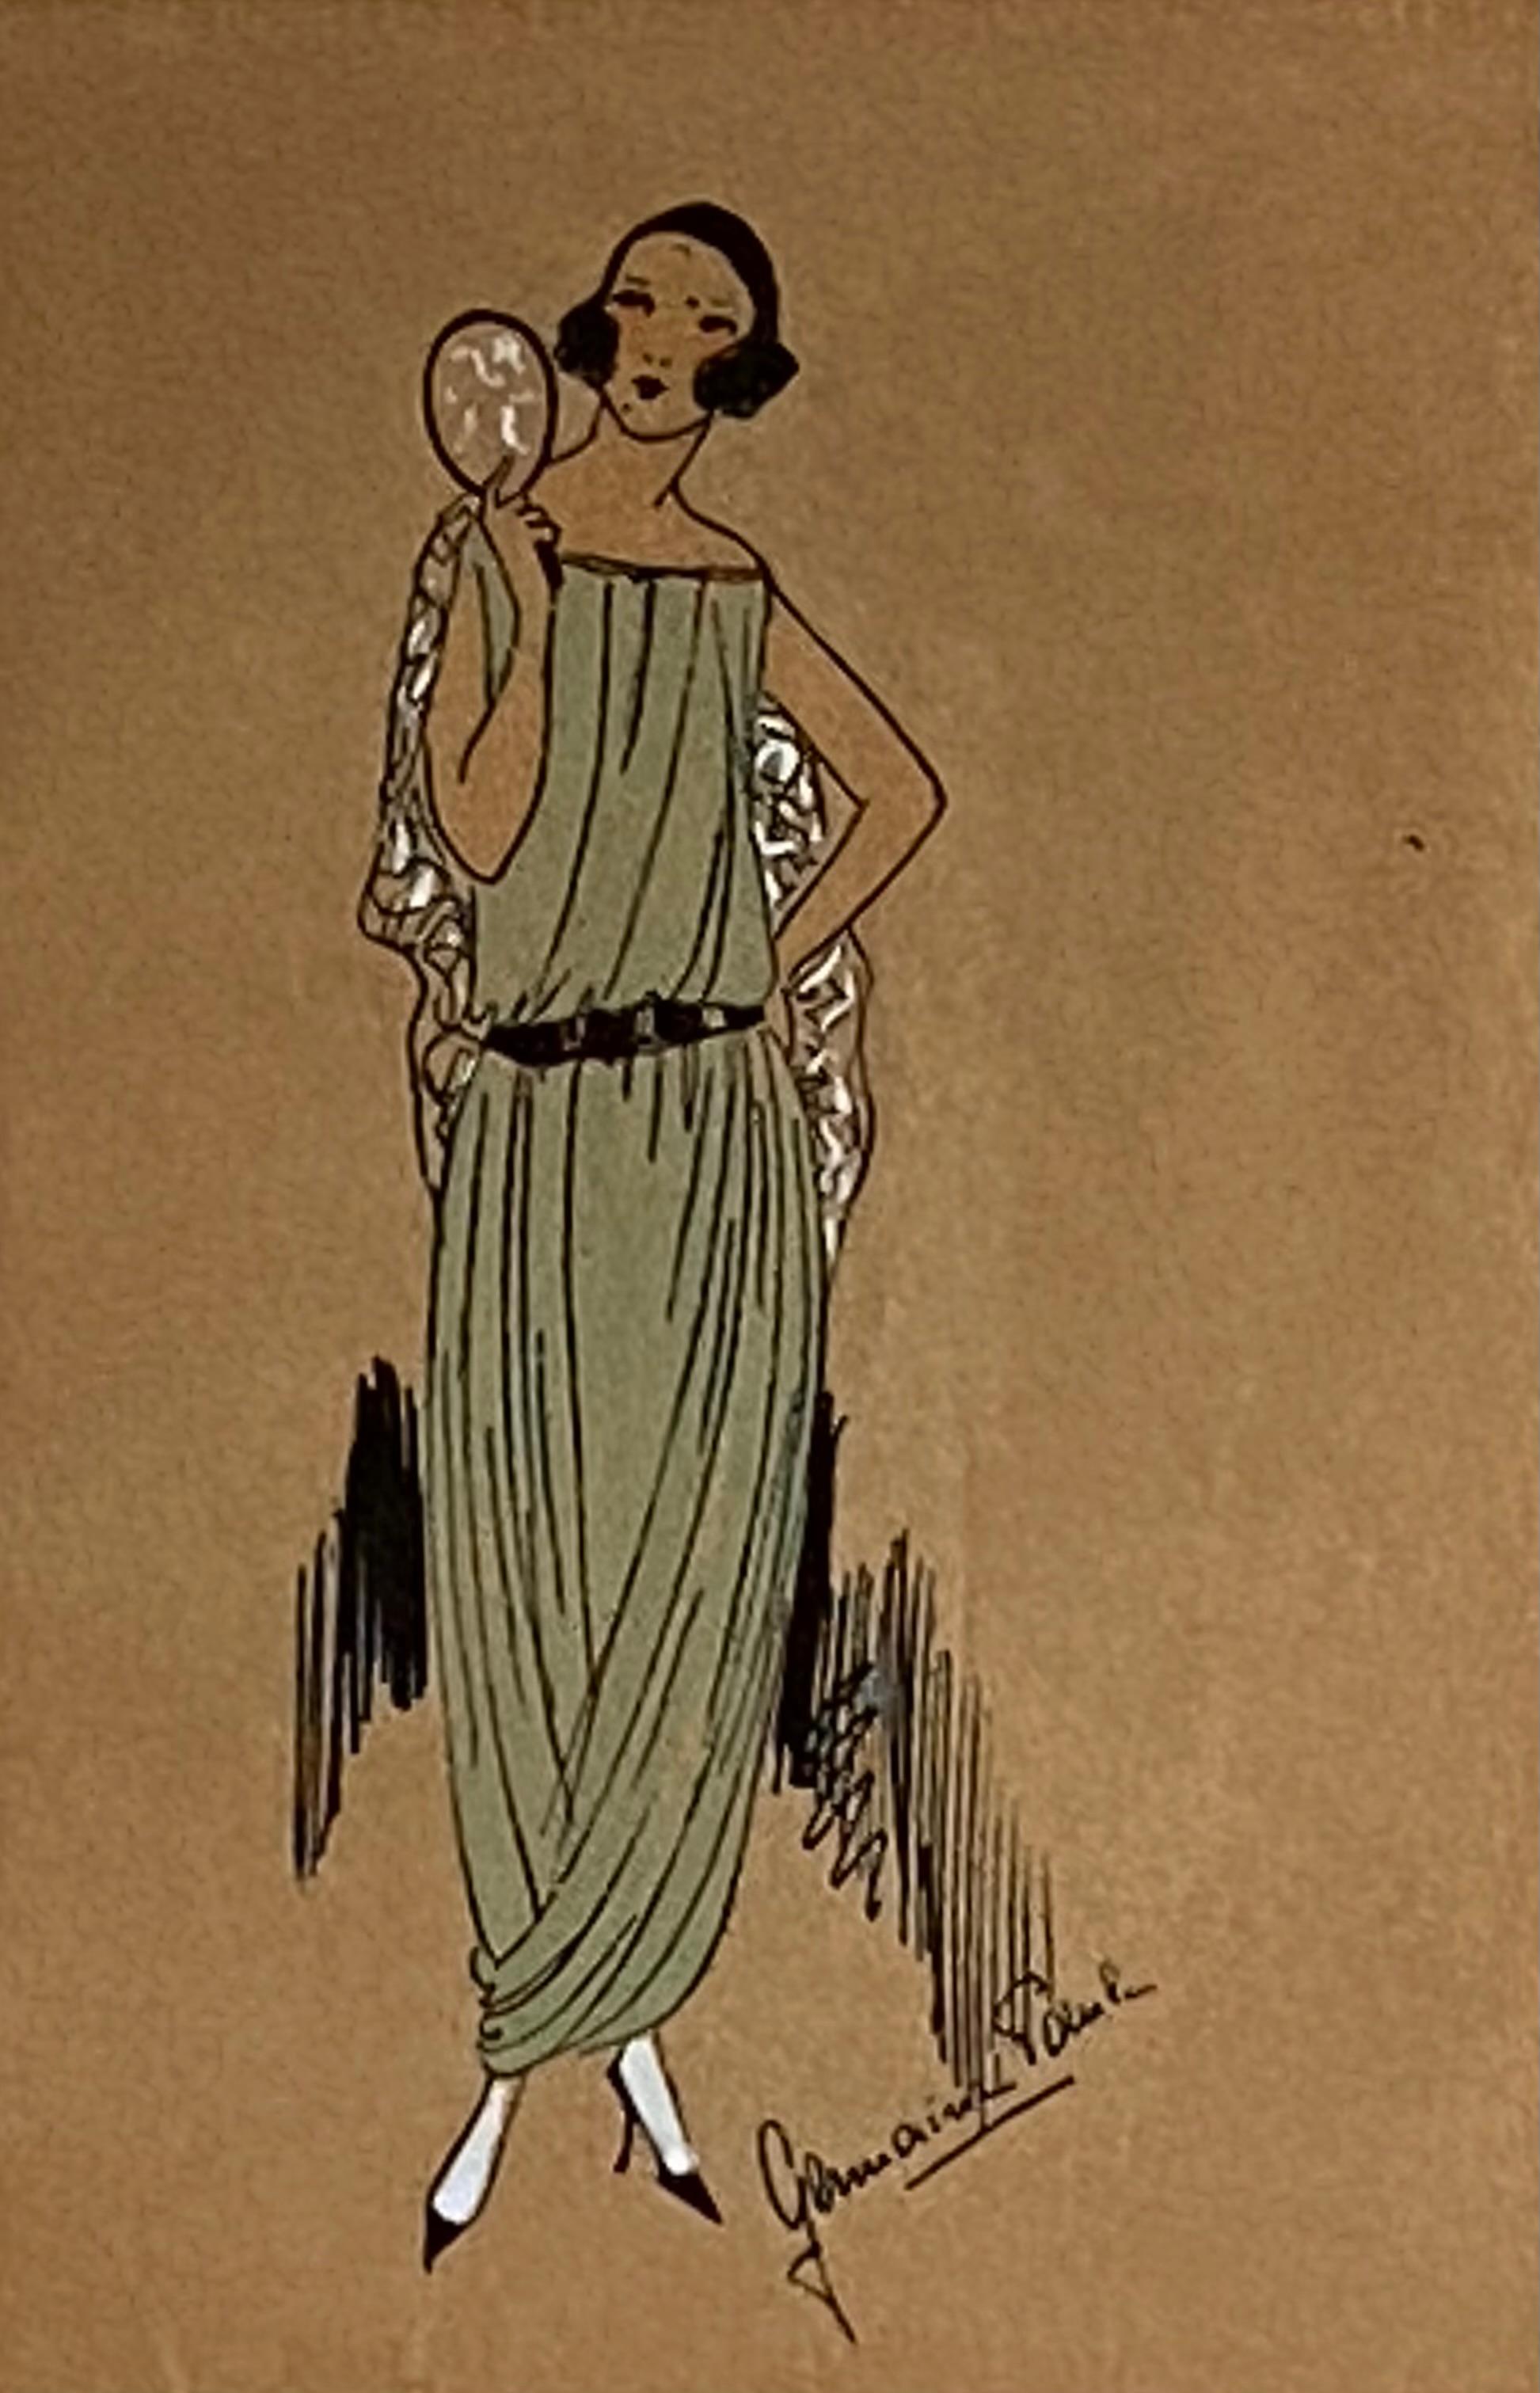 Original fashion illustration for Tres Parisien, December, 1921
Moroccan Crepe Dress by Germaine-Paule Joumard, Fashion Art Deco Pochoir on Chinese Paper.  Artwork size is 7.5 by 5 inches. Signed Germaine Paule lower right. Illustration size is 10